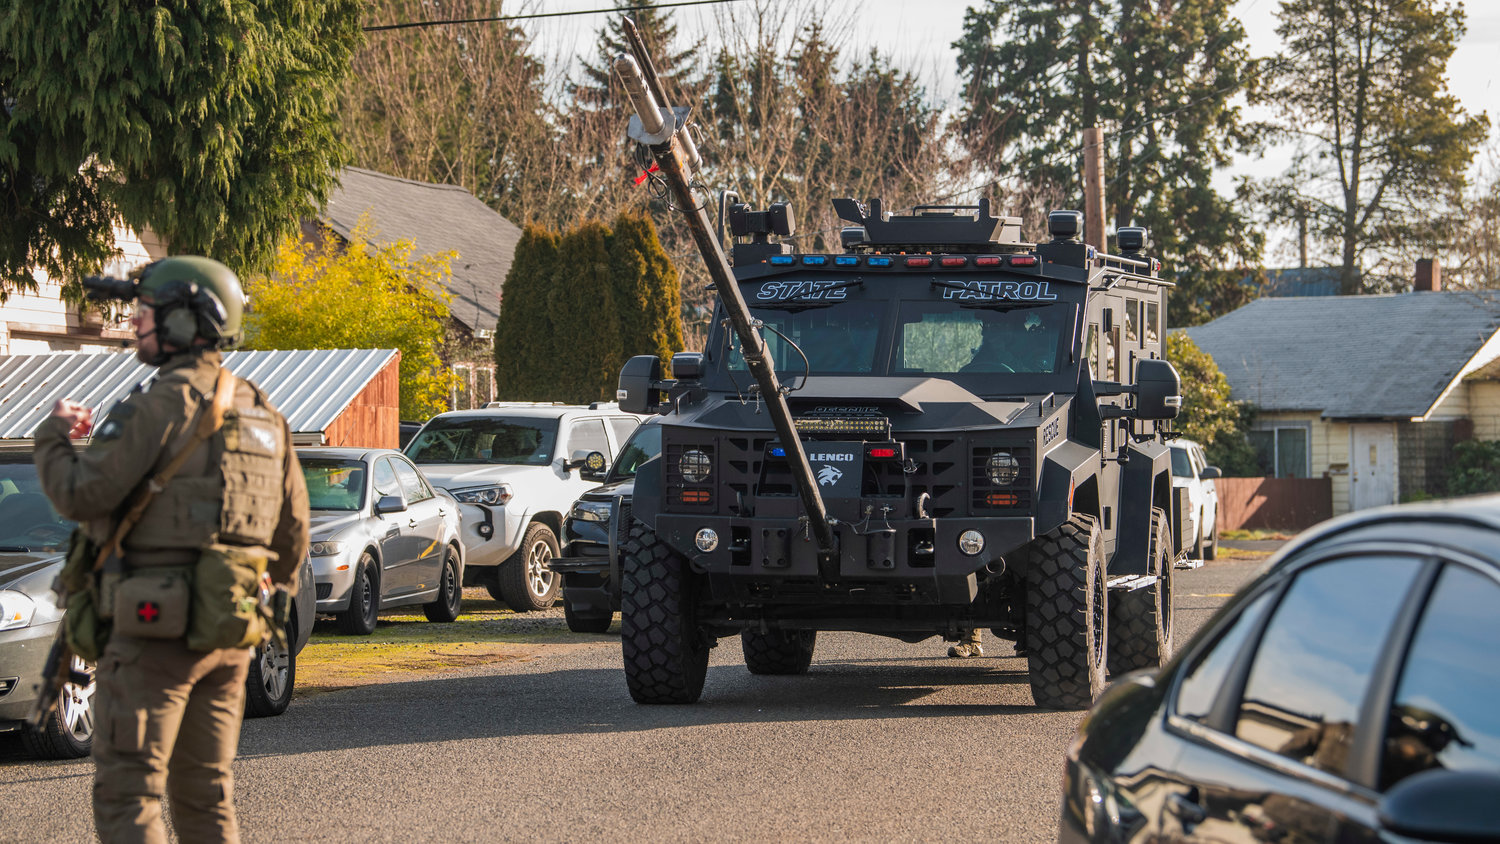 A gas delivery system is seen attached to a Washington State Patrol vehicle in the 1300 block of Windsor Avenue in Centralia on Thursday as additional units arrive on scene.